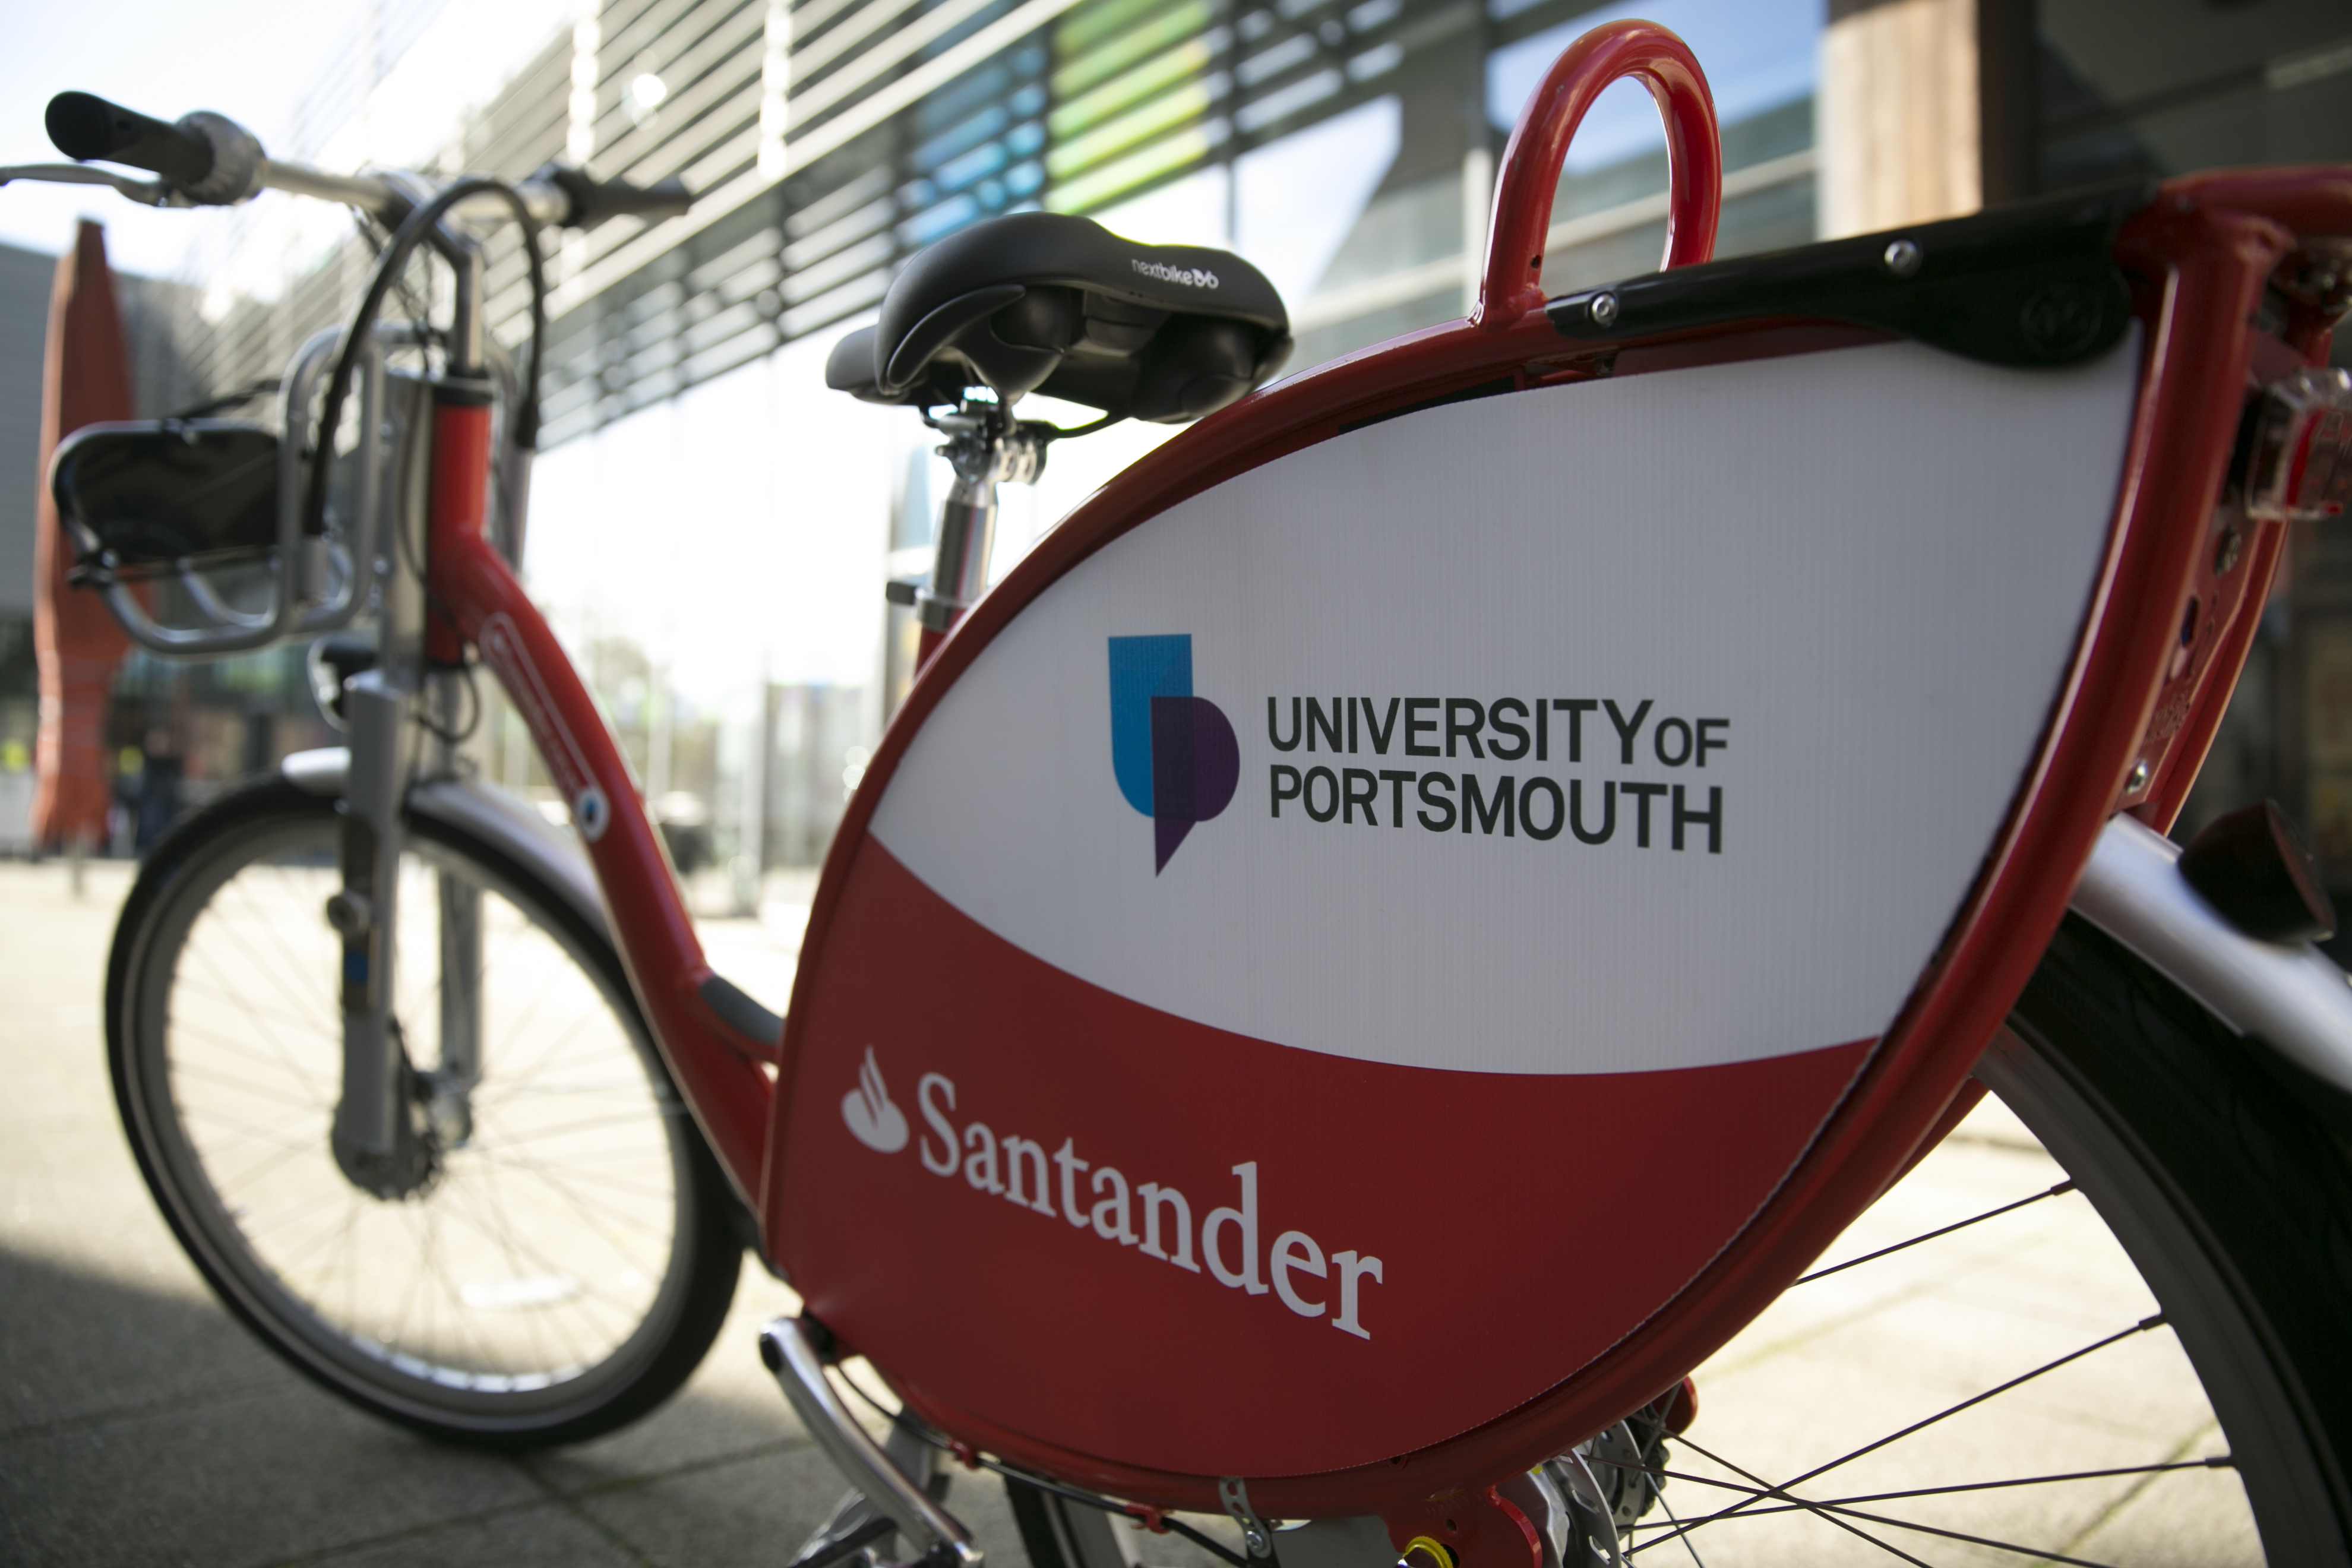 Santander Cycles Crowdfunding Competition | UoP News